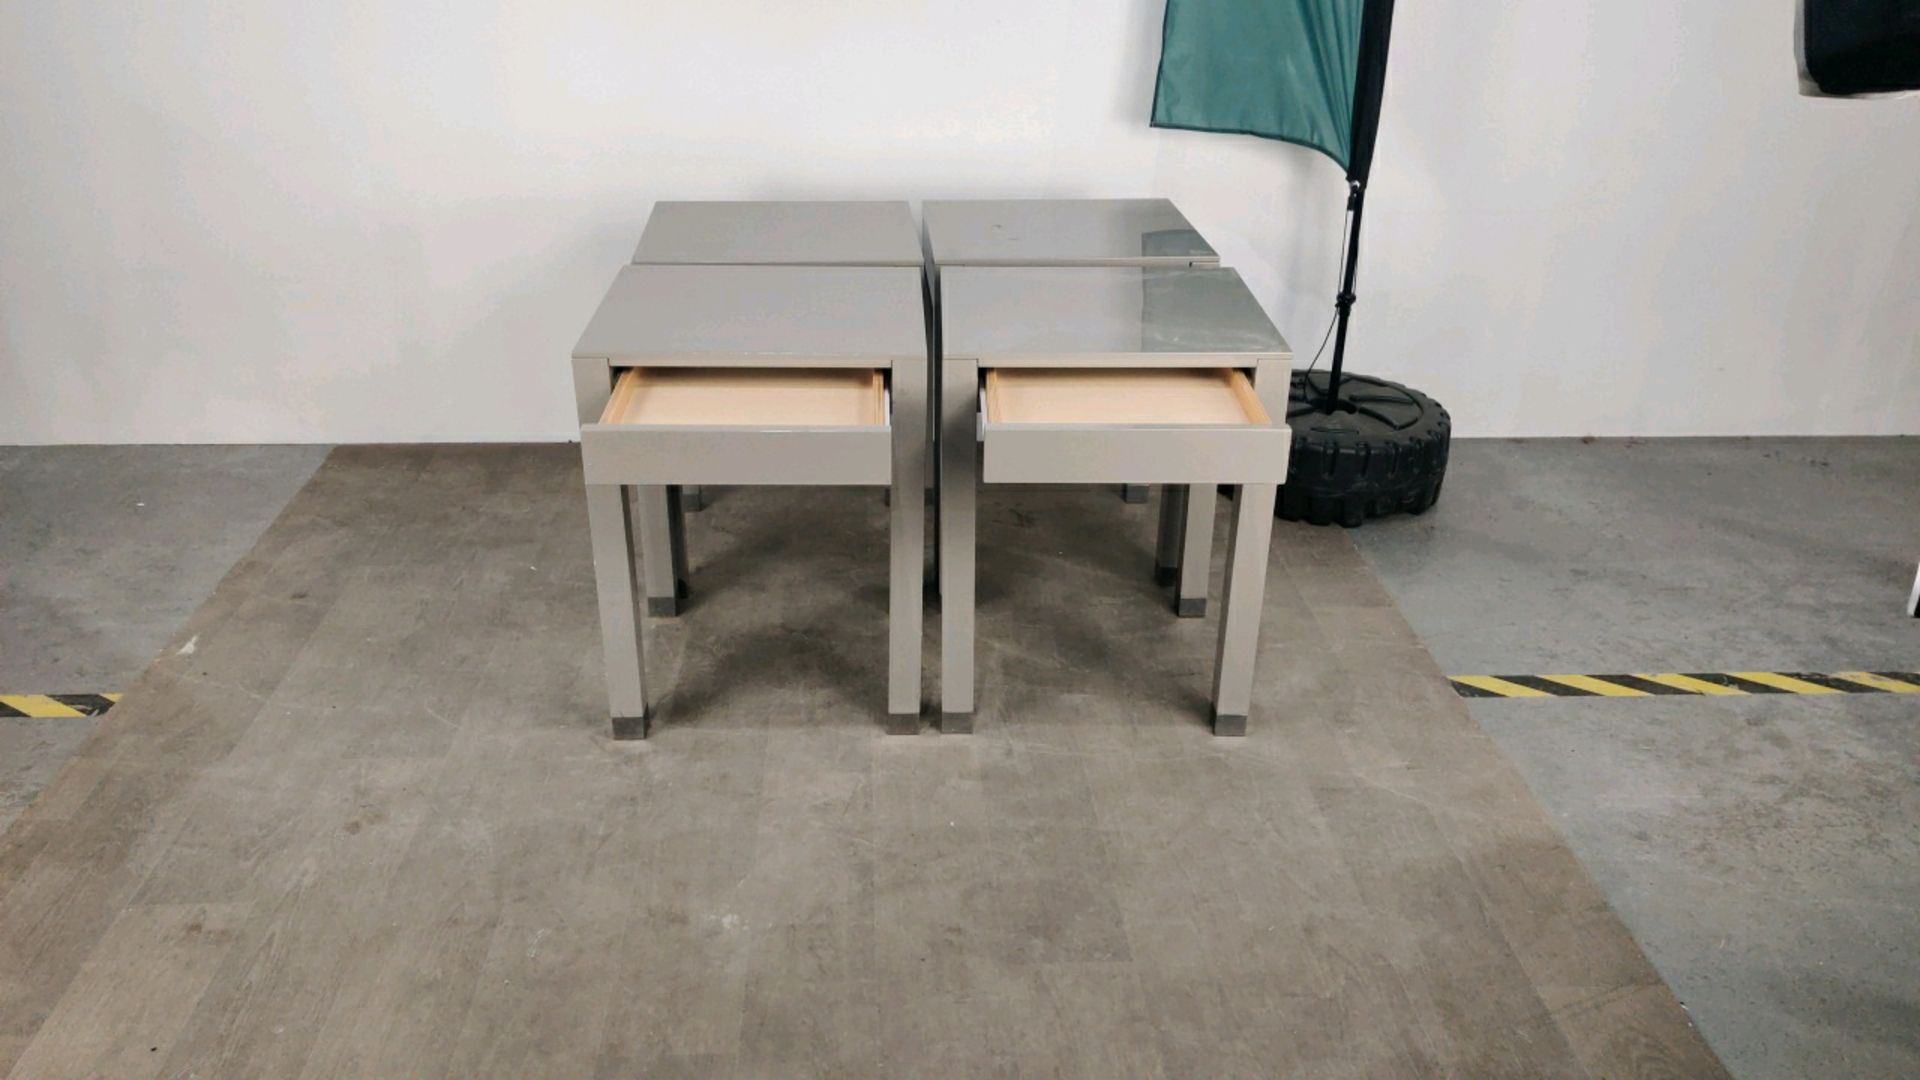 Side Table with Drawer - Grey Gloss Finished x4 - Image 2 of 6